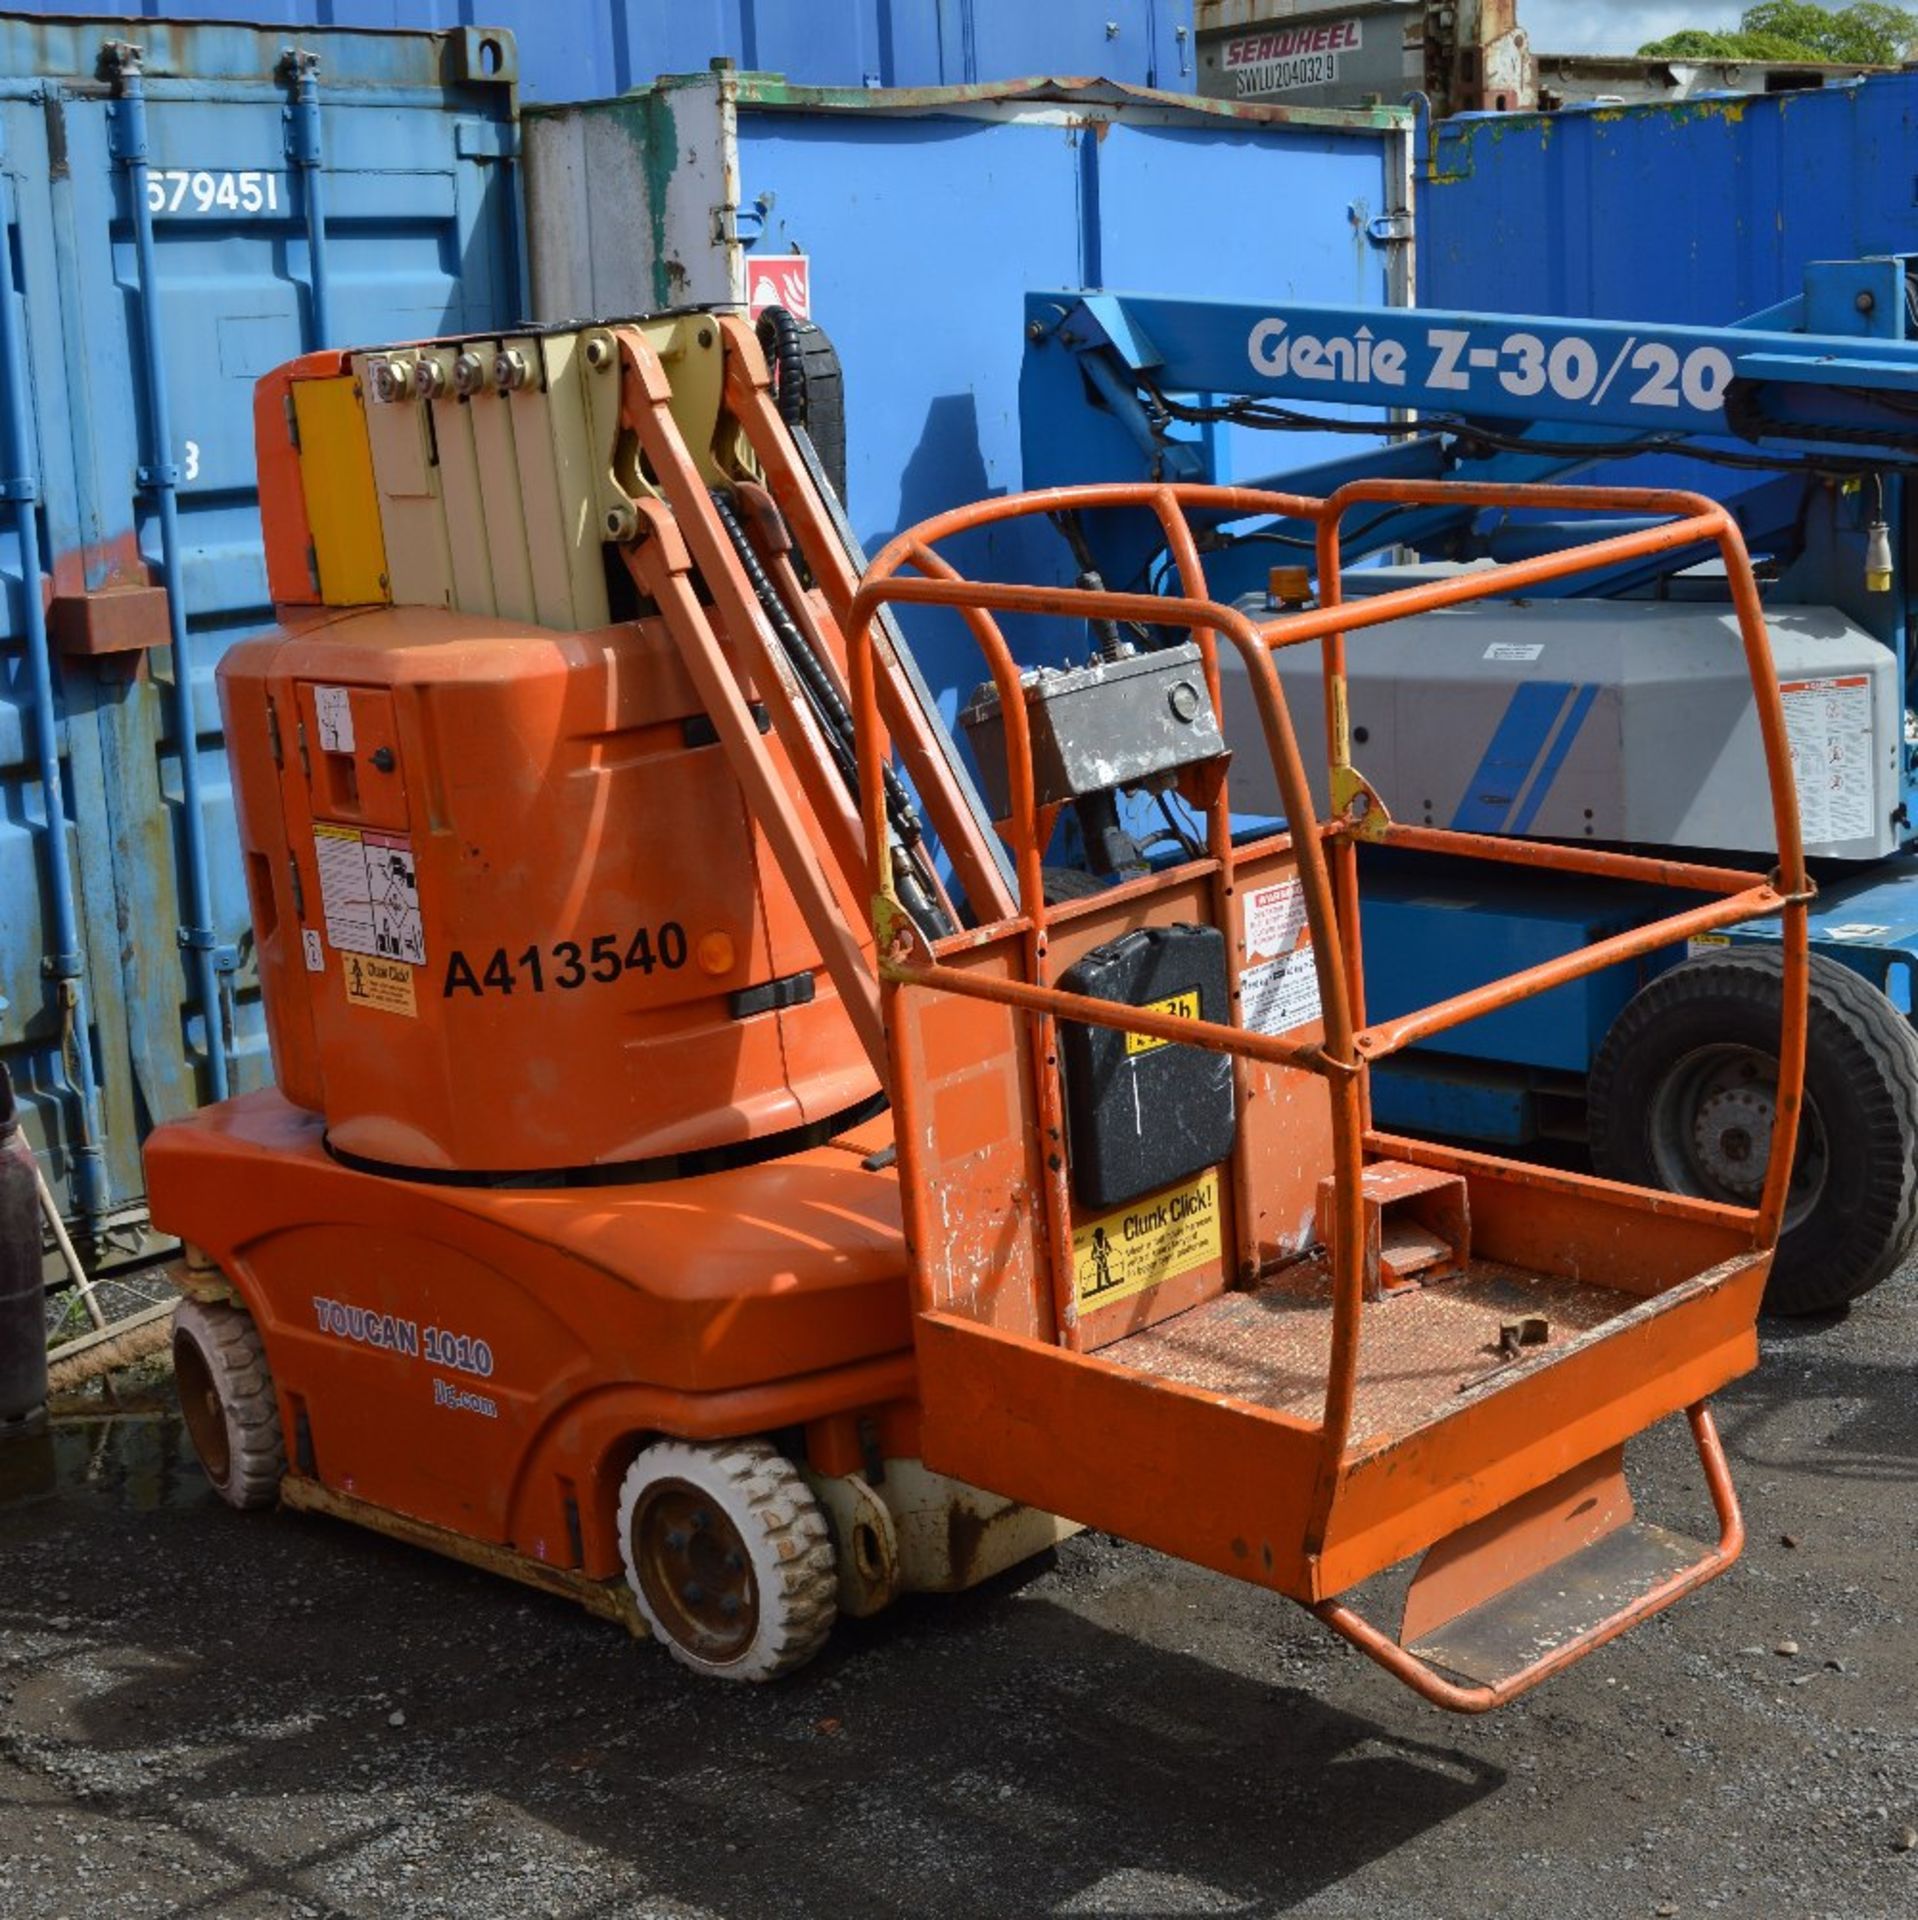 JLG Toucan 1010 8 metre electric boom lift
Year: 2006
S/N: 12548
Recorded hours: 316
A413540